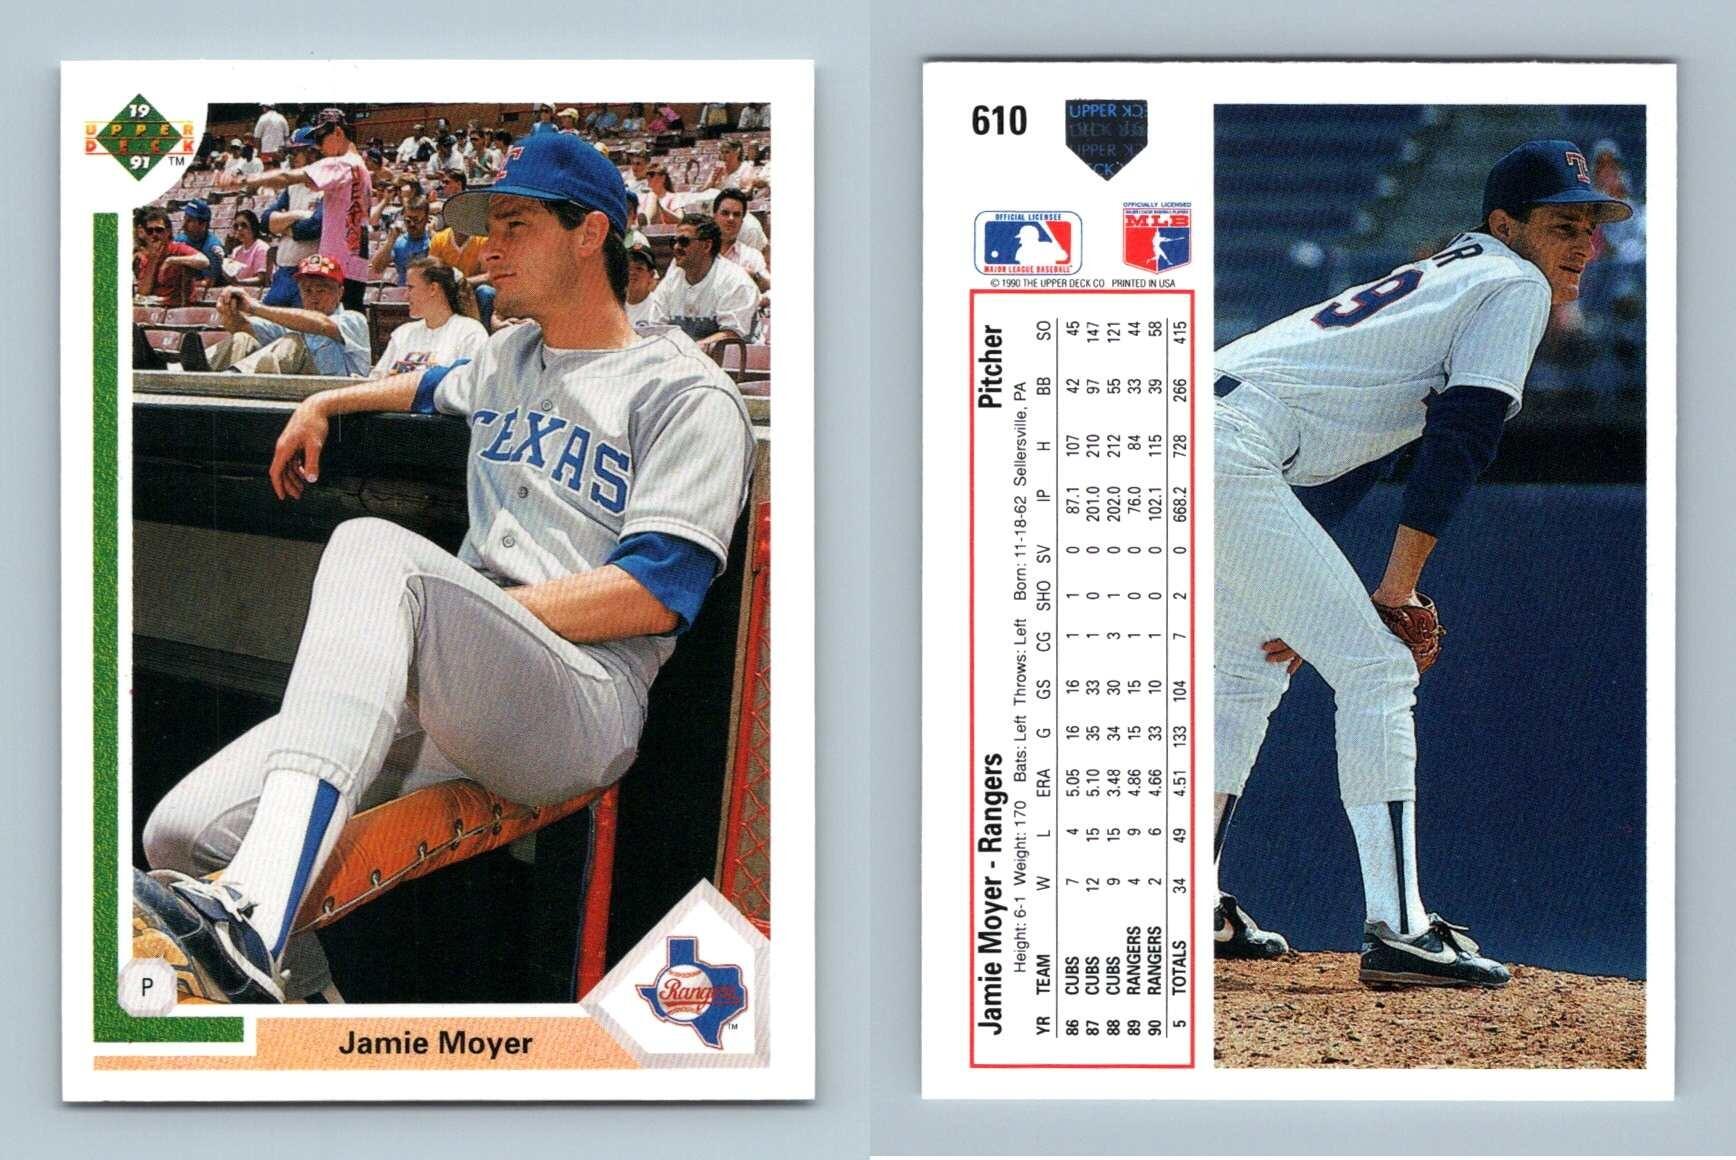 Jamie Moyer - Trading/Sports Card Signed